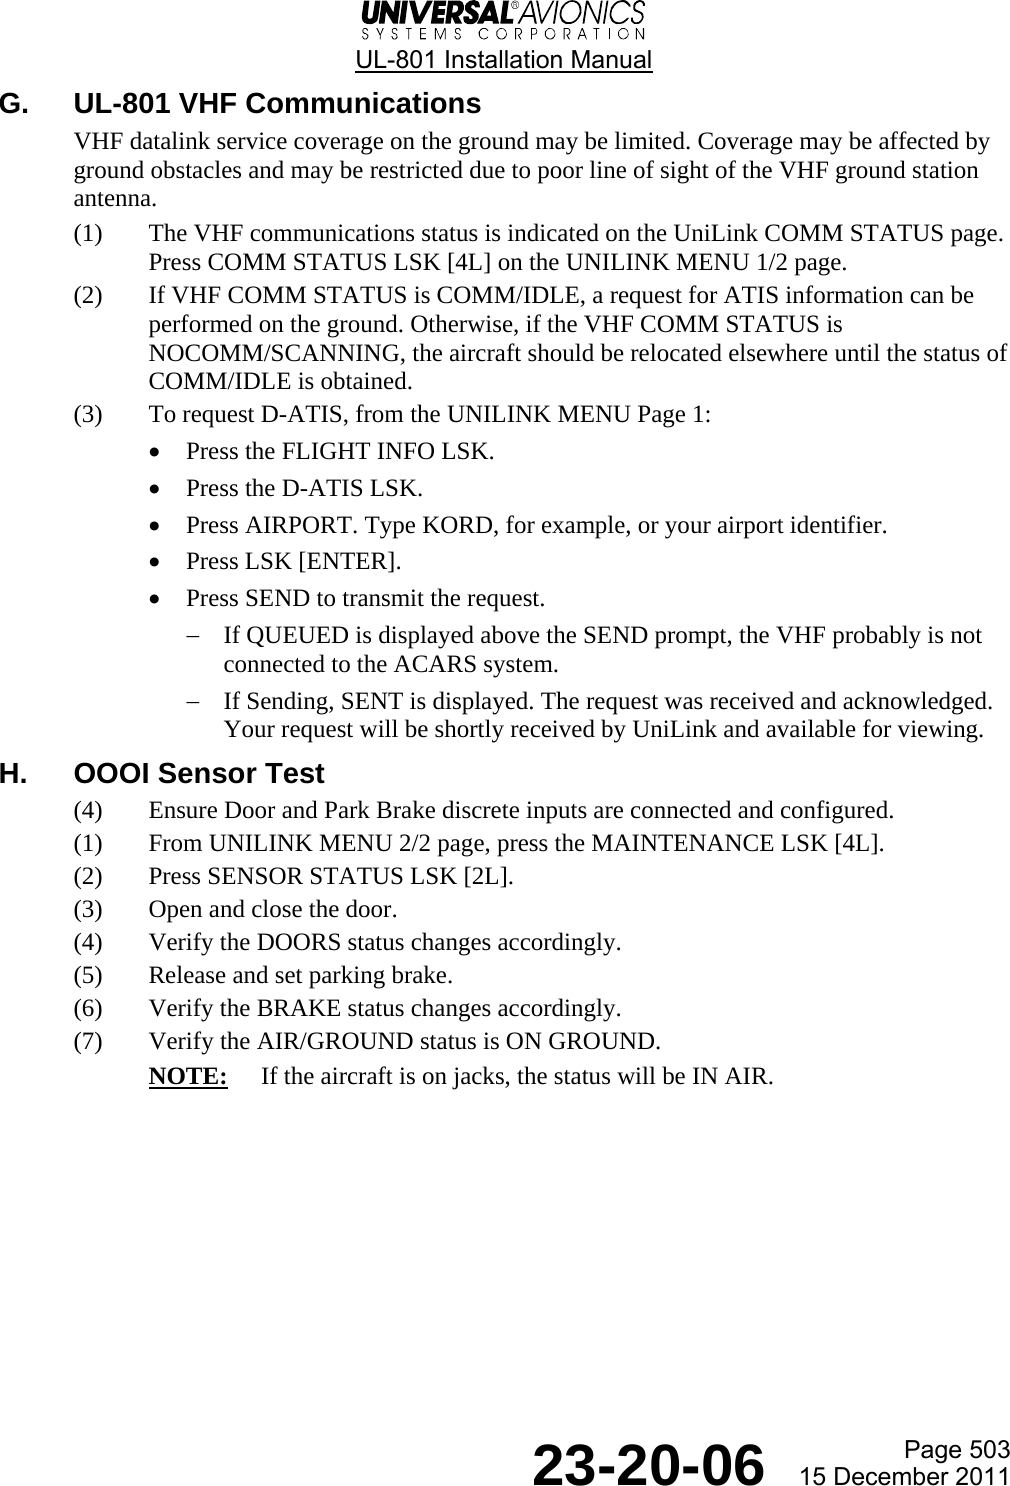  UL-801 Installation Manual  Page 503  23-20-06  15 December 2011 G.  UL-801 VHF Communications VHF datalink service coverage on the ground may be limited. Coverage may be affected by ground obstacles and may be restricted due to poor line of sight of the VHF ground station antenna. (1) The VHF communications status is indicated on the UniLink COMM STATUS page. Press COMM STATUS LSK [4L] on the UNILINK MENU 1/2 page. (2) If VHF COMM STATUS is COMM/IDLE, a request for ATIS information can be performed on the ground. Otherwise, if the VHF COMM STATUS is NOCOMM/SCANNING, the aircraft should be relocated elsewhere until the status of COMM/IDLE is obtained. (3) To request D-ATIS, from the UNILINK MENU Page 1: • Press the FLIGHT INFO LSK. • Press the D-ATIS LSK. • Press AIRPORT. Type KORD, for example, or your airport identifier. • Press LSK [ENTER]. • Press SEND to transmit the request.  − If QUEUED is displayed above the SEND prompt, the VHF probably is not connected to the ACARS system. − If Sending, SENT is displayed. The request was received and acknowledged. Your request will be shortly received by UniLink and available for viewing. H. OOOI Sensor Test (4) Ensure Door and Park Brake discrete inputs are connected and configured. (1) From UNILINK MENU 2/2 page, press the MAINTENANCE LSK [4L]. (2) Press SENSOR STATUS LSK [2L]. (3) Open and close the door. (4) Verify the DOORS status changes accordingly. (5) Release and set parking brake. (6) Verify the BRAKE status changes accordingly. (7) Verify the AIR/GROUND status is ON GROUND. NOTE:  If the aircraft is on jacks, the status will be IN AIR. 